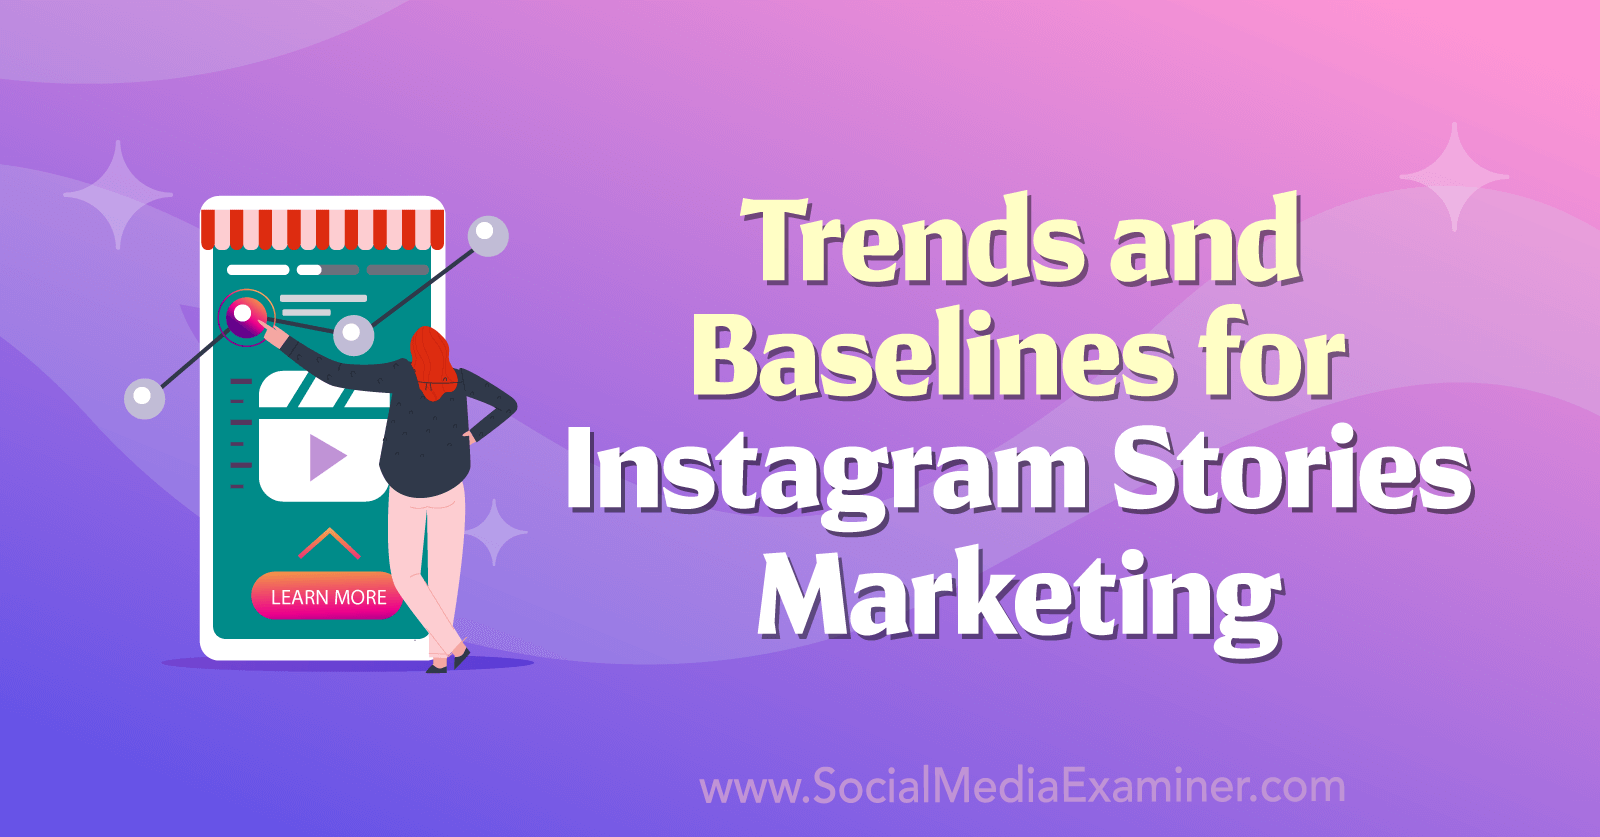 Trends and Baselines for Instagram Stories Marketing by Michael Stelzner